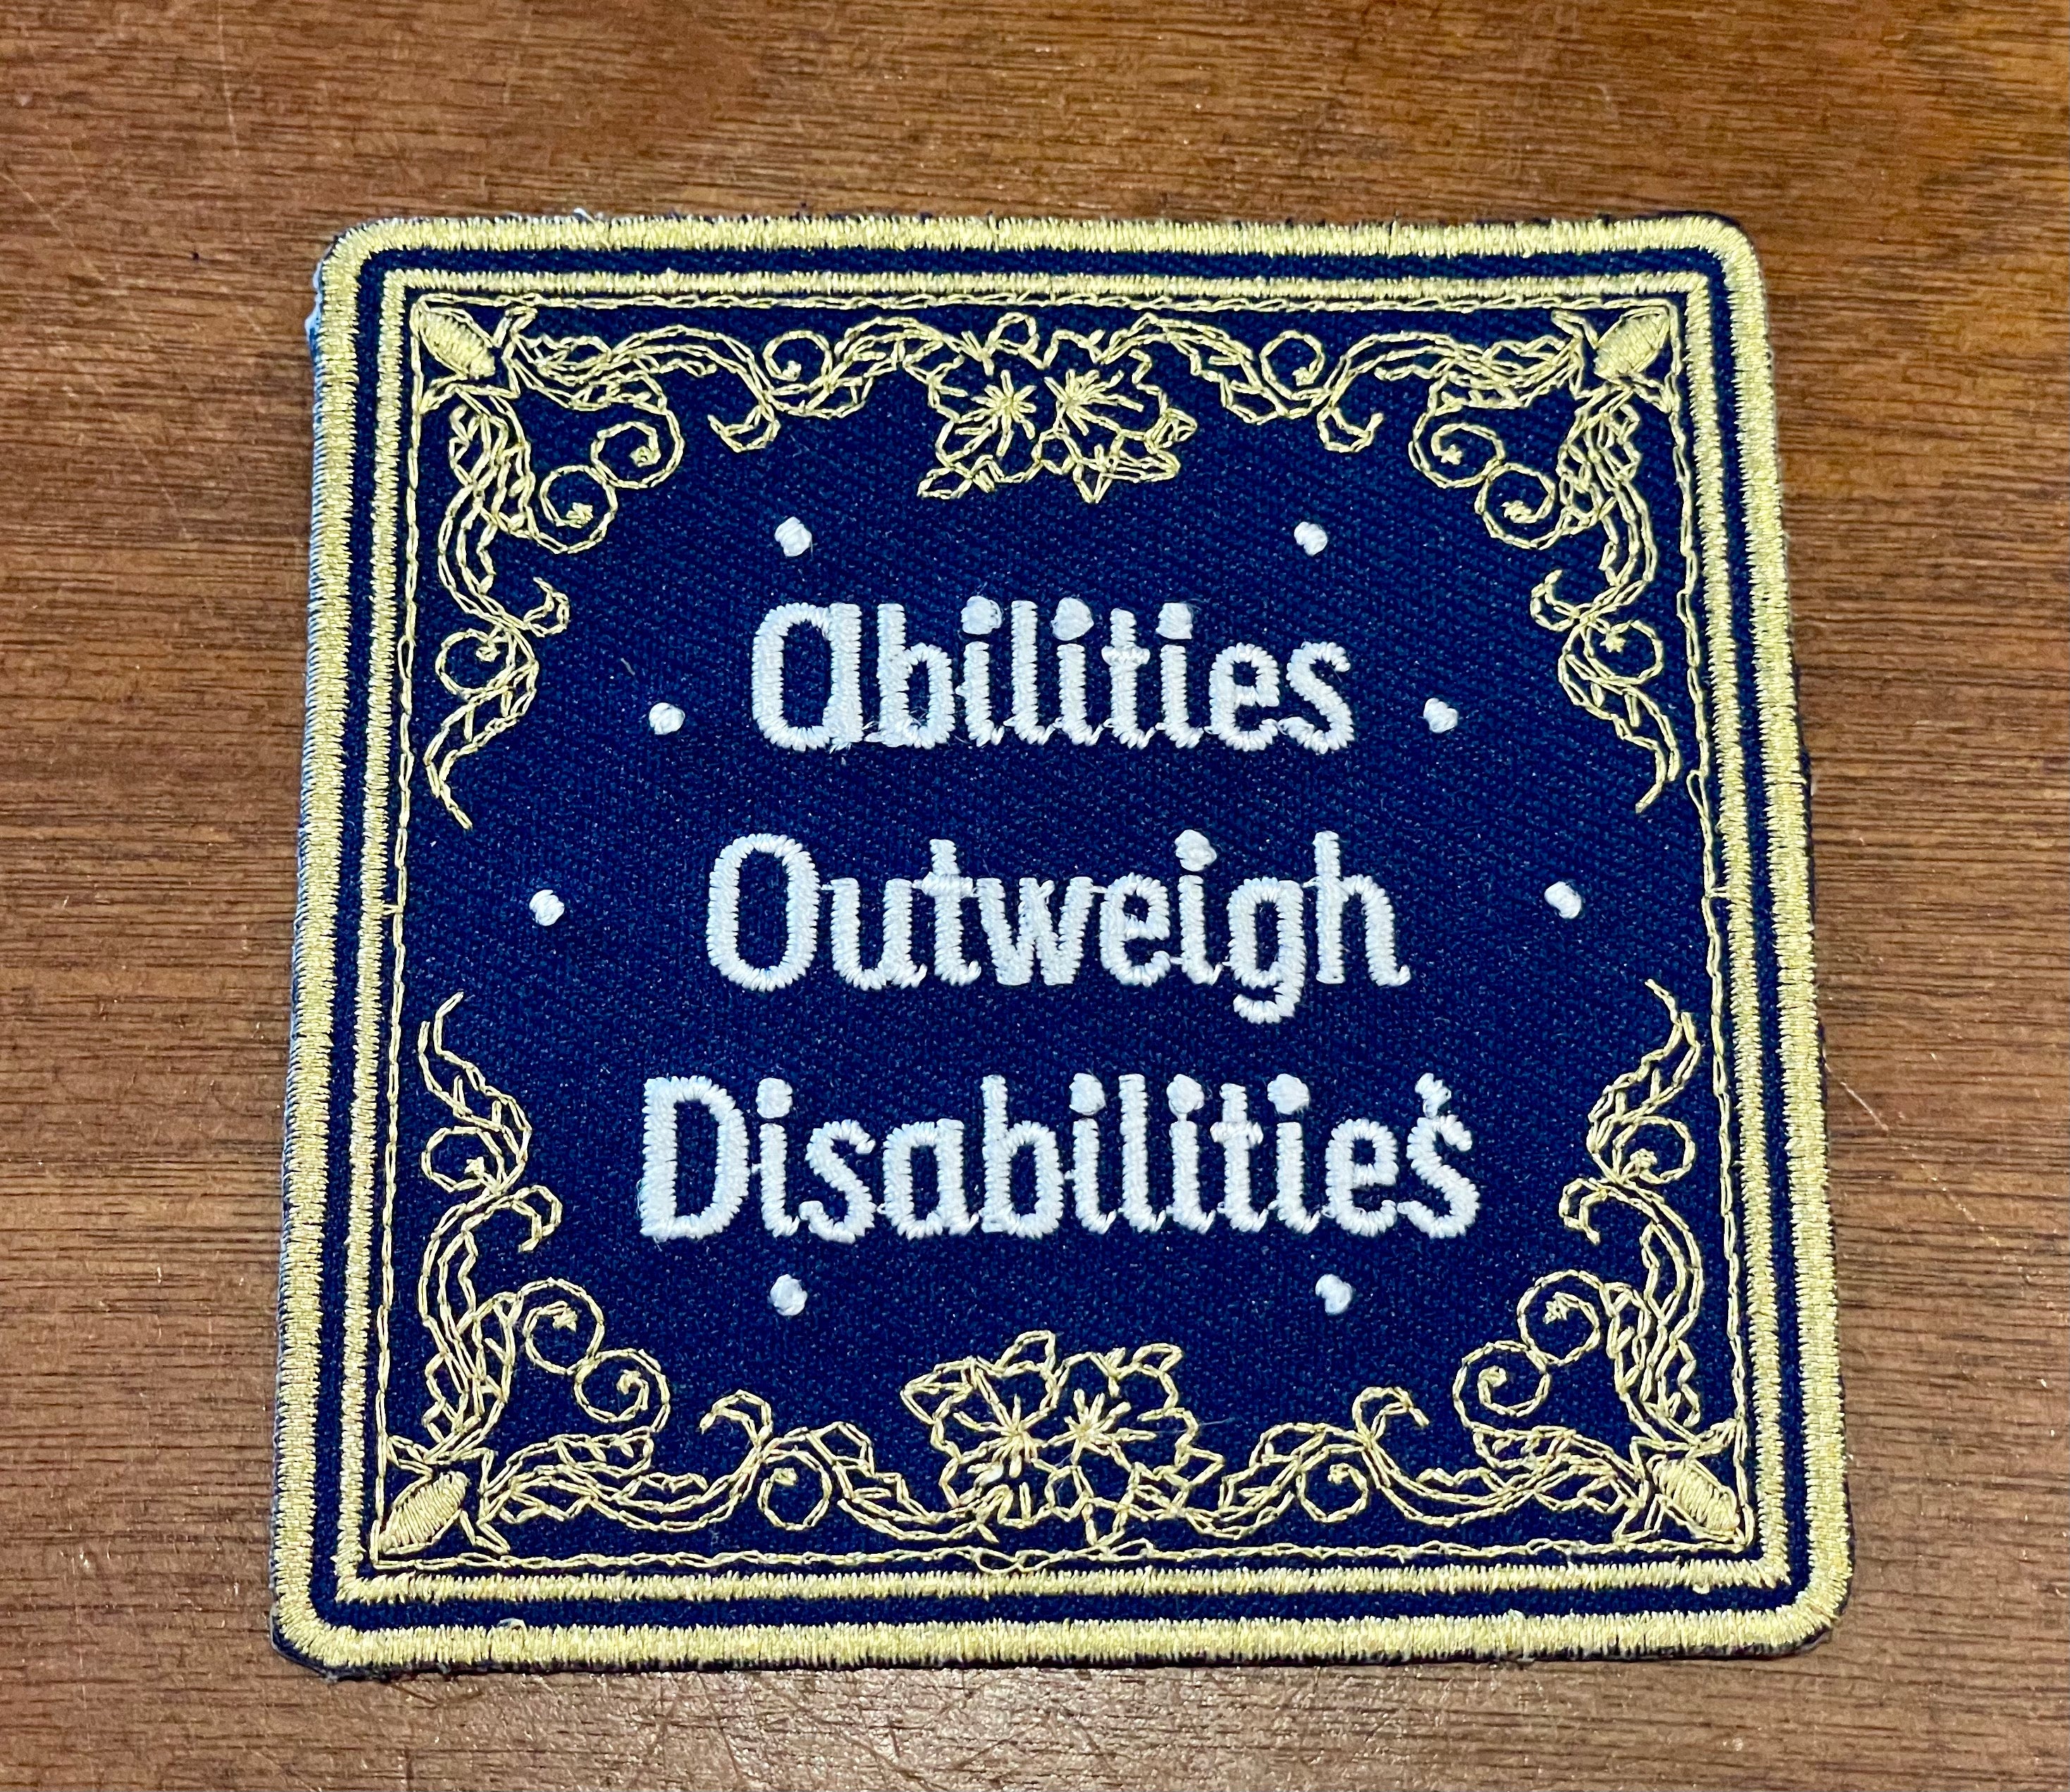 Abilities Outweigh Disabilities Patch